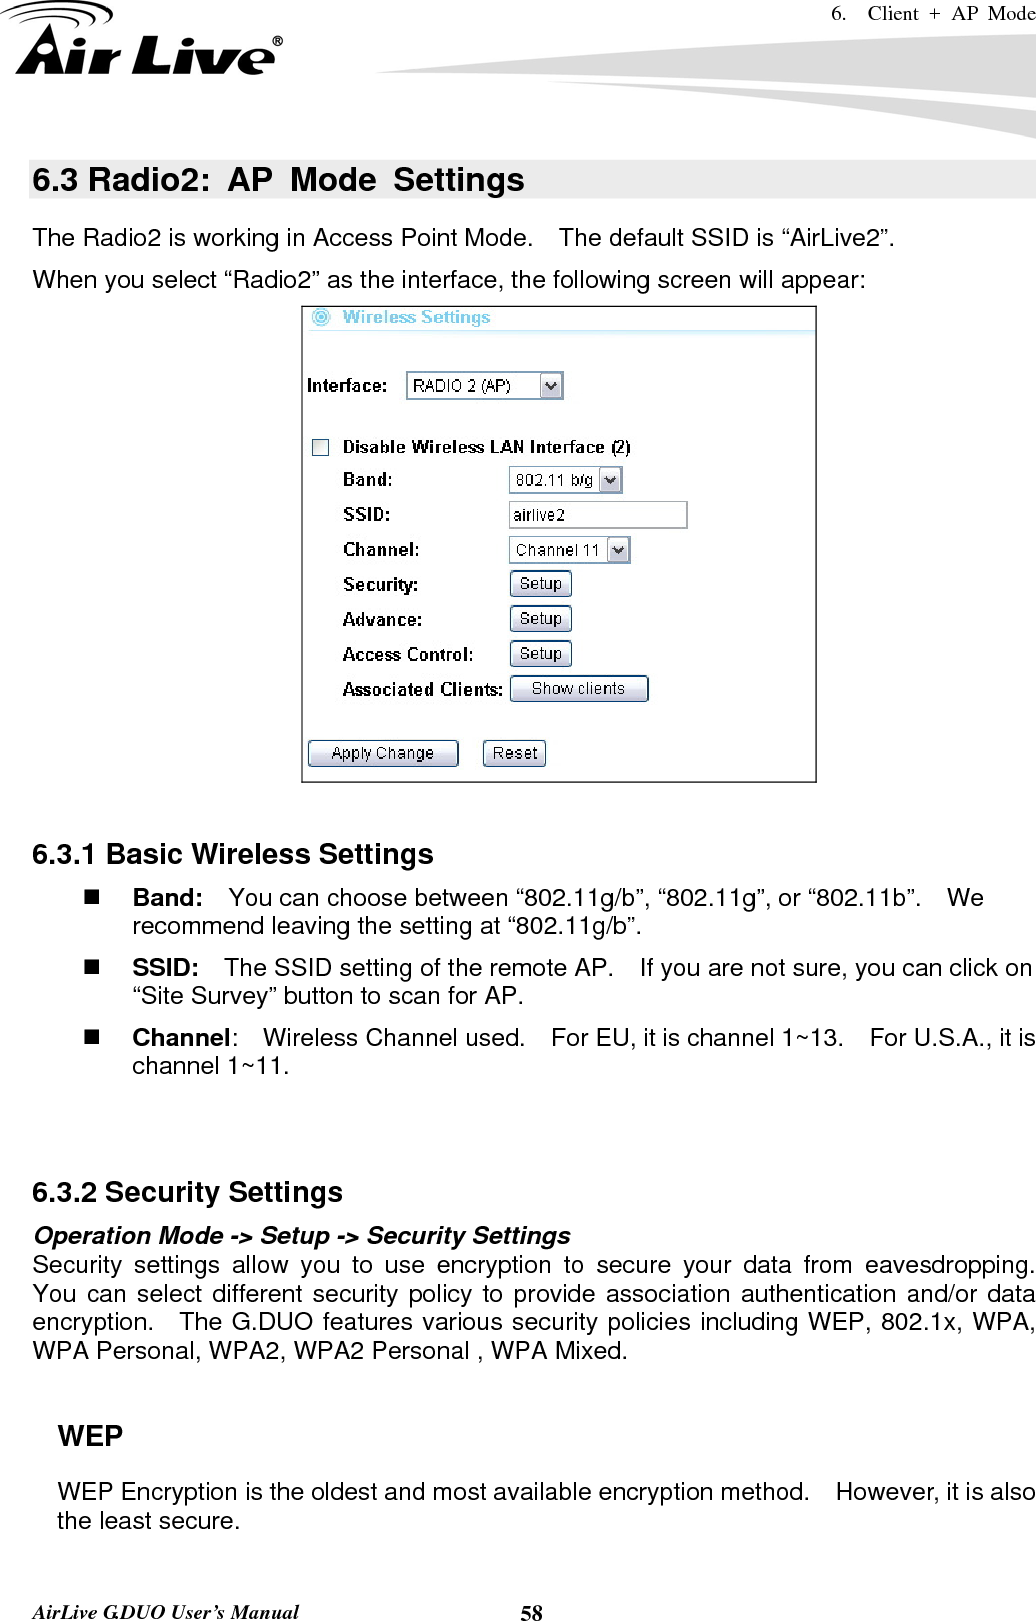 6.  Client + AP Mode   AirLive G.DUO User’s Manual  586.3 Radio2: AP Mode Settings The Radio2 is working in Access Point Mode.    The default SSID is “AirLive2”. When you select “Radio2” as the interface, the following screen will appear:   6.3.1 Basic Wireless Settings  Band:    You can choose between “802.11g/b”, “802.11g”, or “802.11b”.    We recommend leaving the setting at “802.11g/b”.  SSID:    The SSID setting of the remote AP.    If you are not sure, you can click on “Site Survey” button to scan for AP.  Channel:  Wireless Channel used.  For EU, it is channel 1~13.    For U.S.A., it is channel 1~11.     6.3.2 Security Settings Operation Mode -&gt; Setup -&gt; Security Settings Security settings allow you to use encryption to secure your data from eavesdropping.  You can select different security policy to provide association authentication and/or data encryption.    The G.DUO features various security policies including WEP, 802.1x, WPA, WPA Personal, WPA2, WPA2 Personal , WPA Mixed.      WEP WEP Encryption is the oldest and most available encryption method.    However, it is also the least secure.    